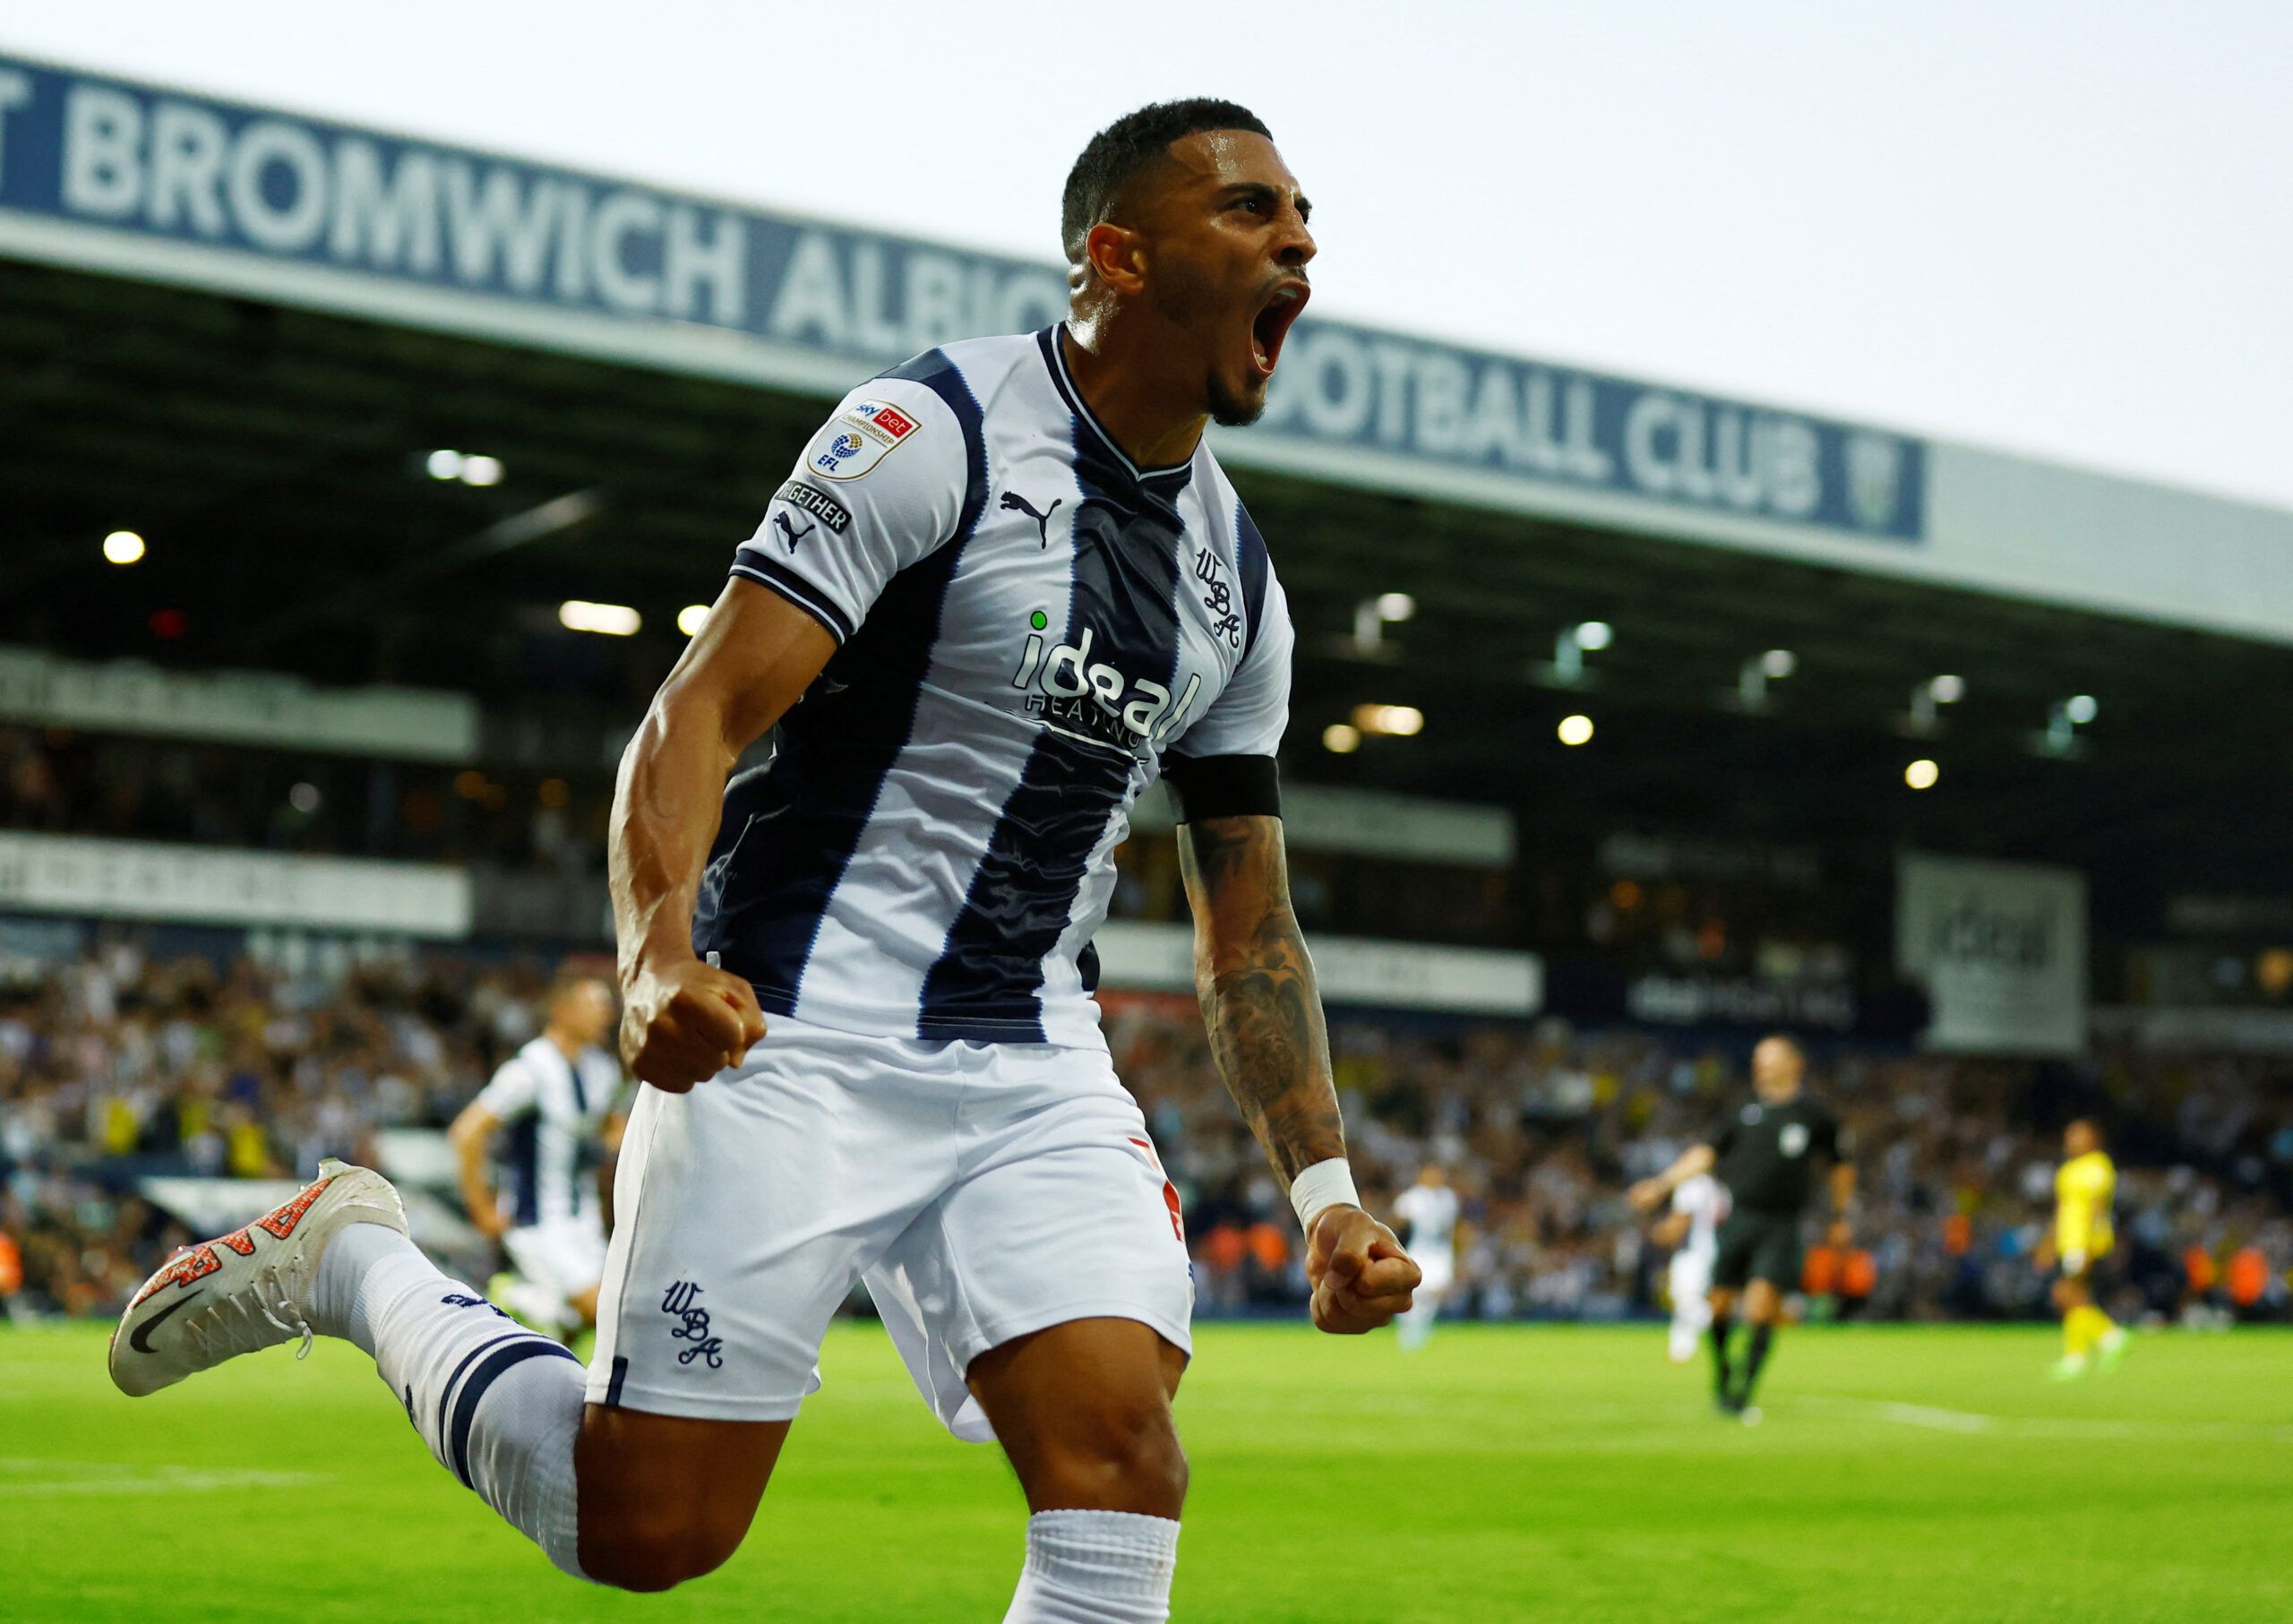 Soccer Football - Championship - West Bromwich Albion v Watford - The Hawthorns, West Bromwich, Britain - August 8, 2022  West Bromwich Albion's Karlan Grant celebrates scoring their first goal  Action Images/Andrew Boyers  EDITORIAL USE ONLY. No use with unauthorized audio, video, data, fixture lists, club/league logos or 